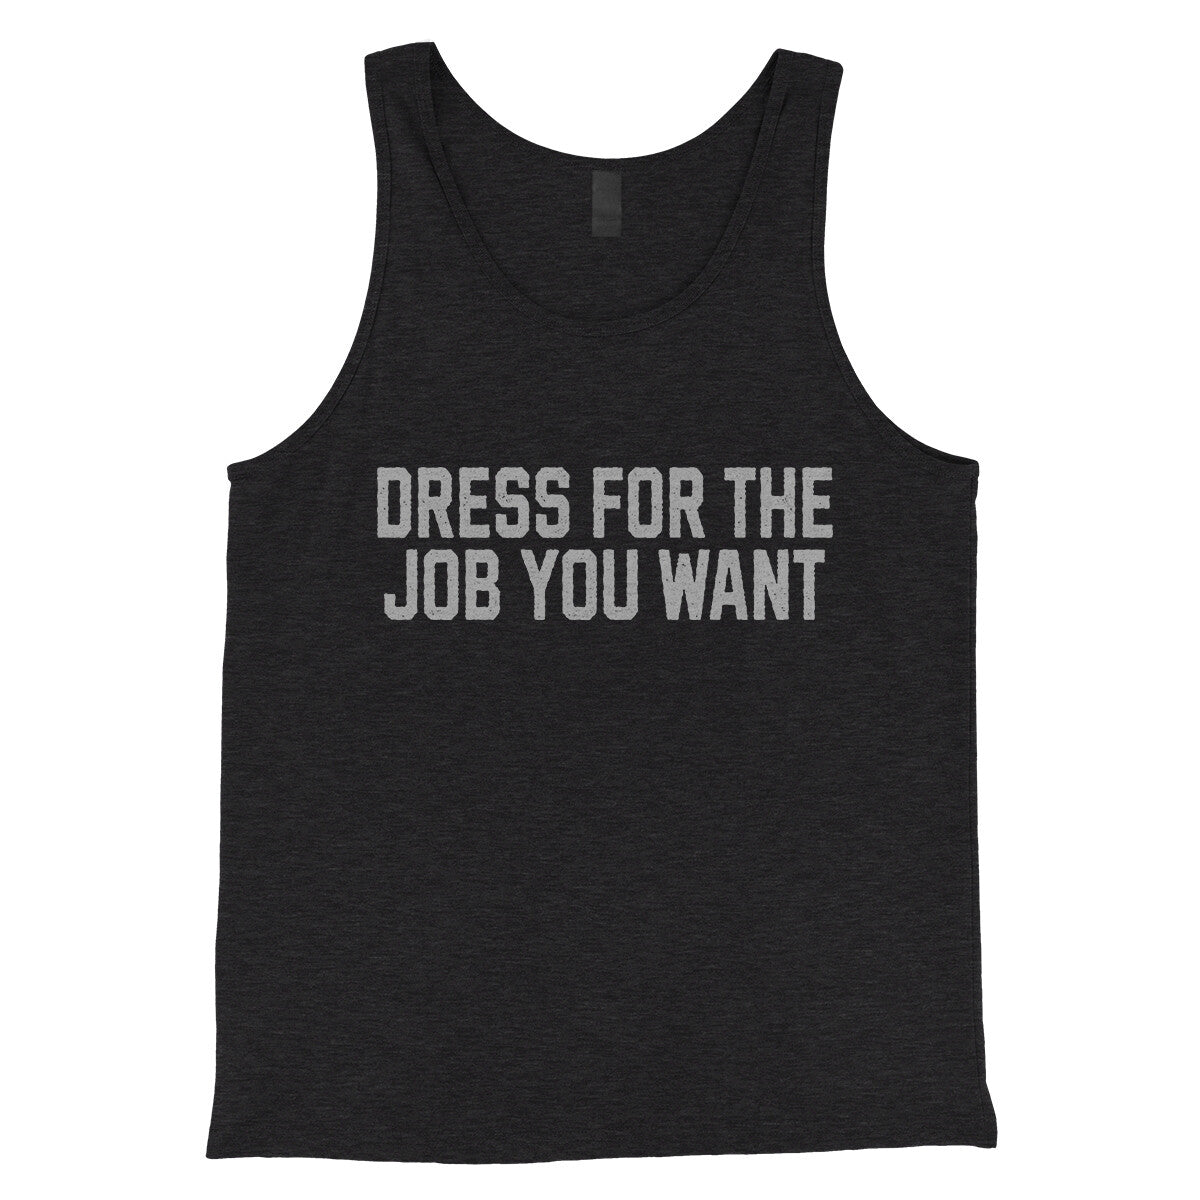 Dress for the Job you Want in Charcoal Black TriBlend Color